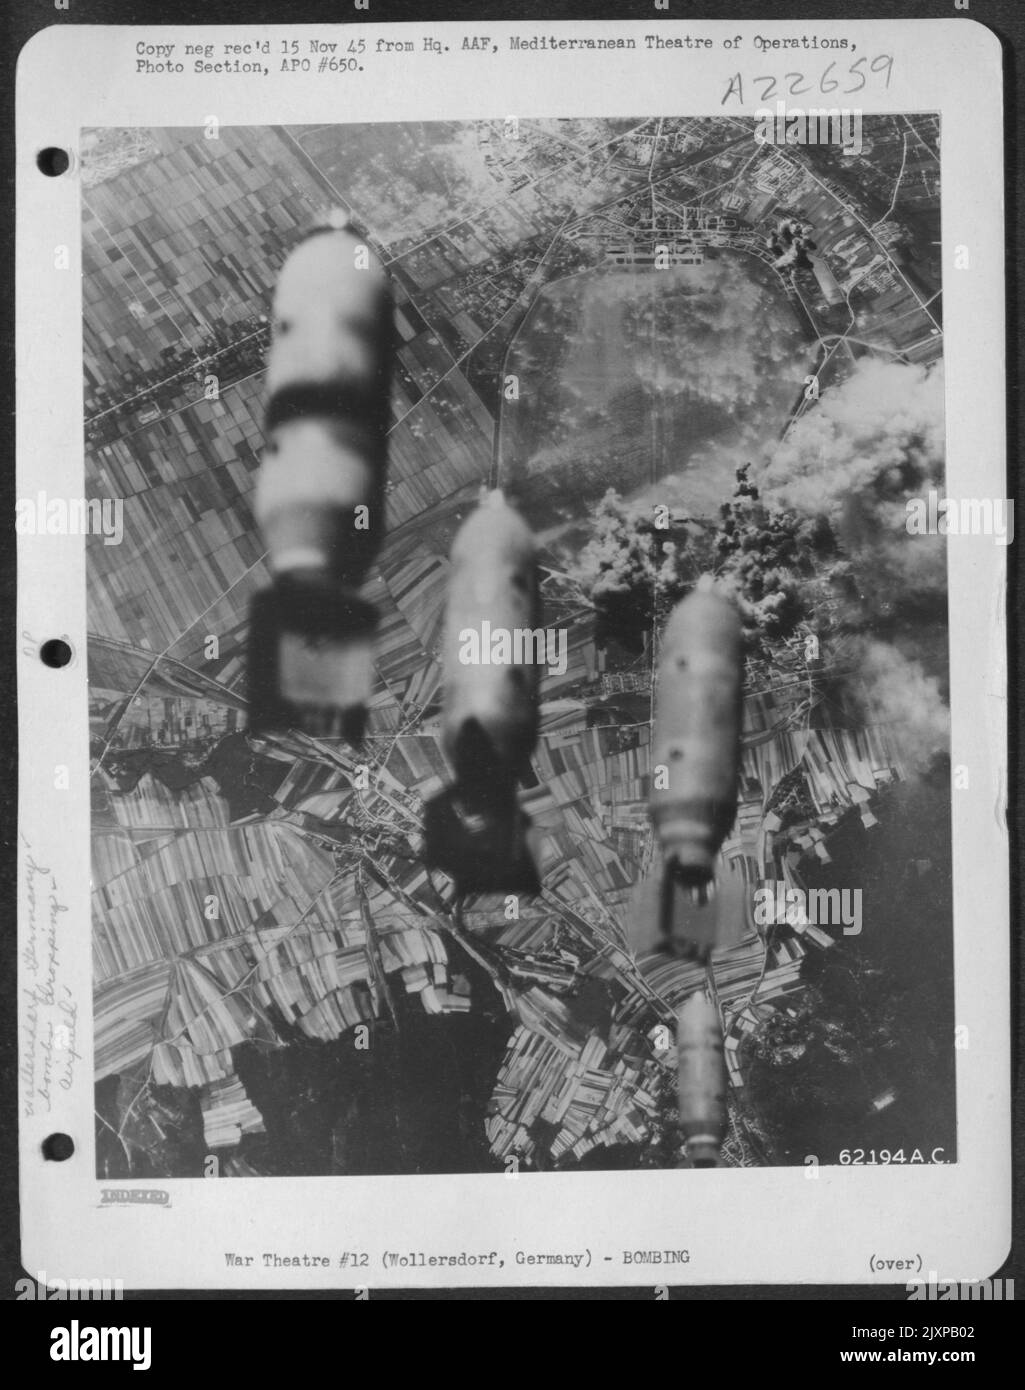 Bombs Dropped By Boeing B-17 Flying Fortresses Of The 15Th Af Explode On Airdrome Near Wollersdorf, Germany, On 29 May 1944. Stock Photo